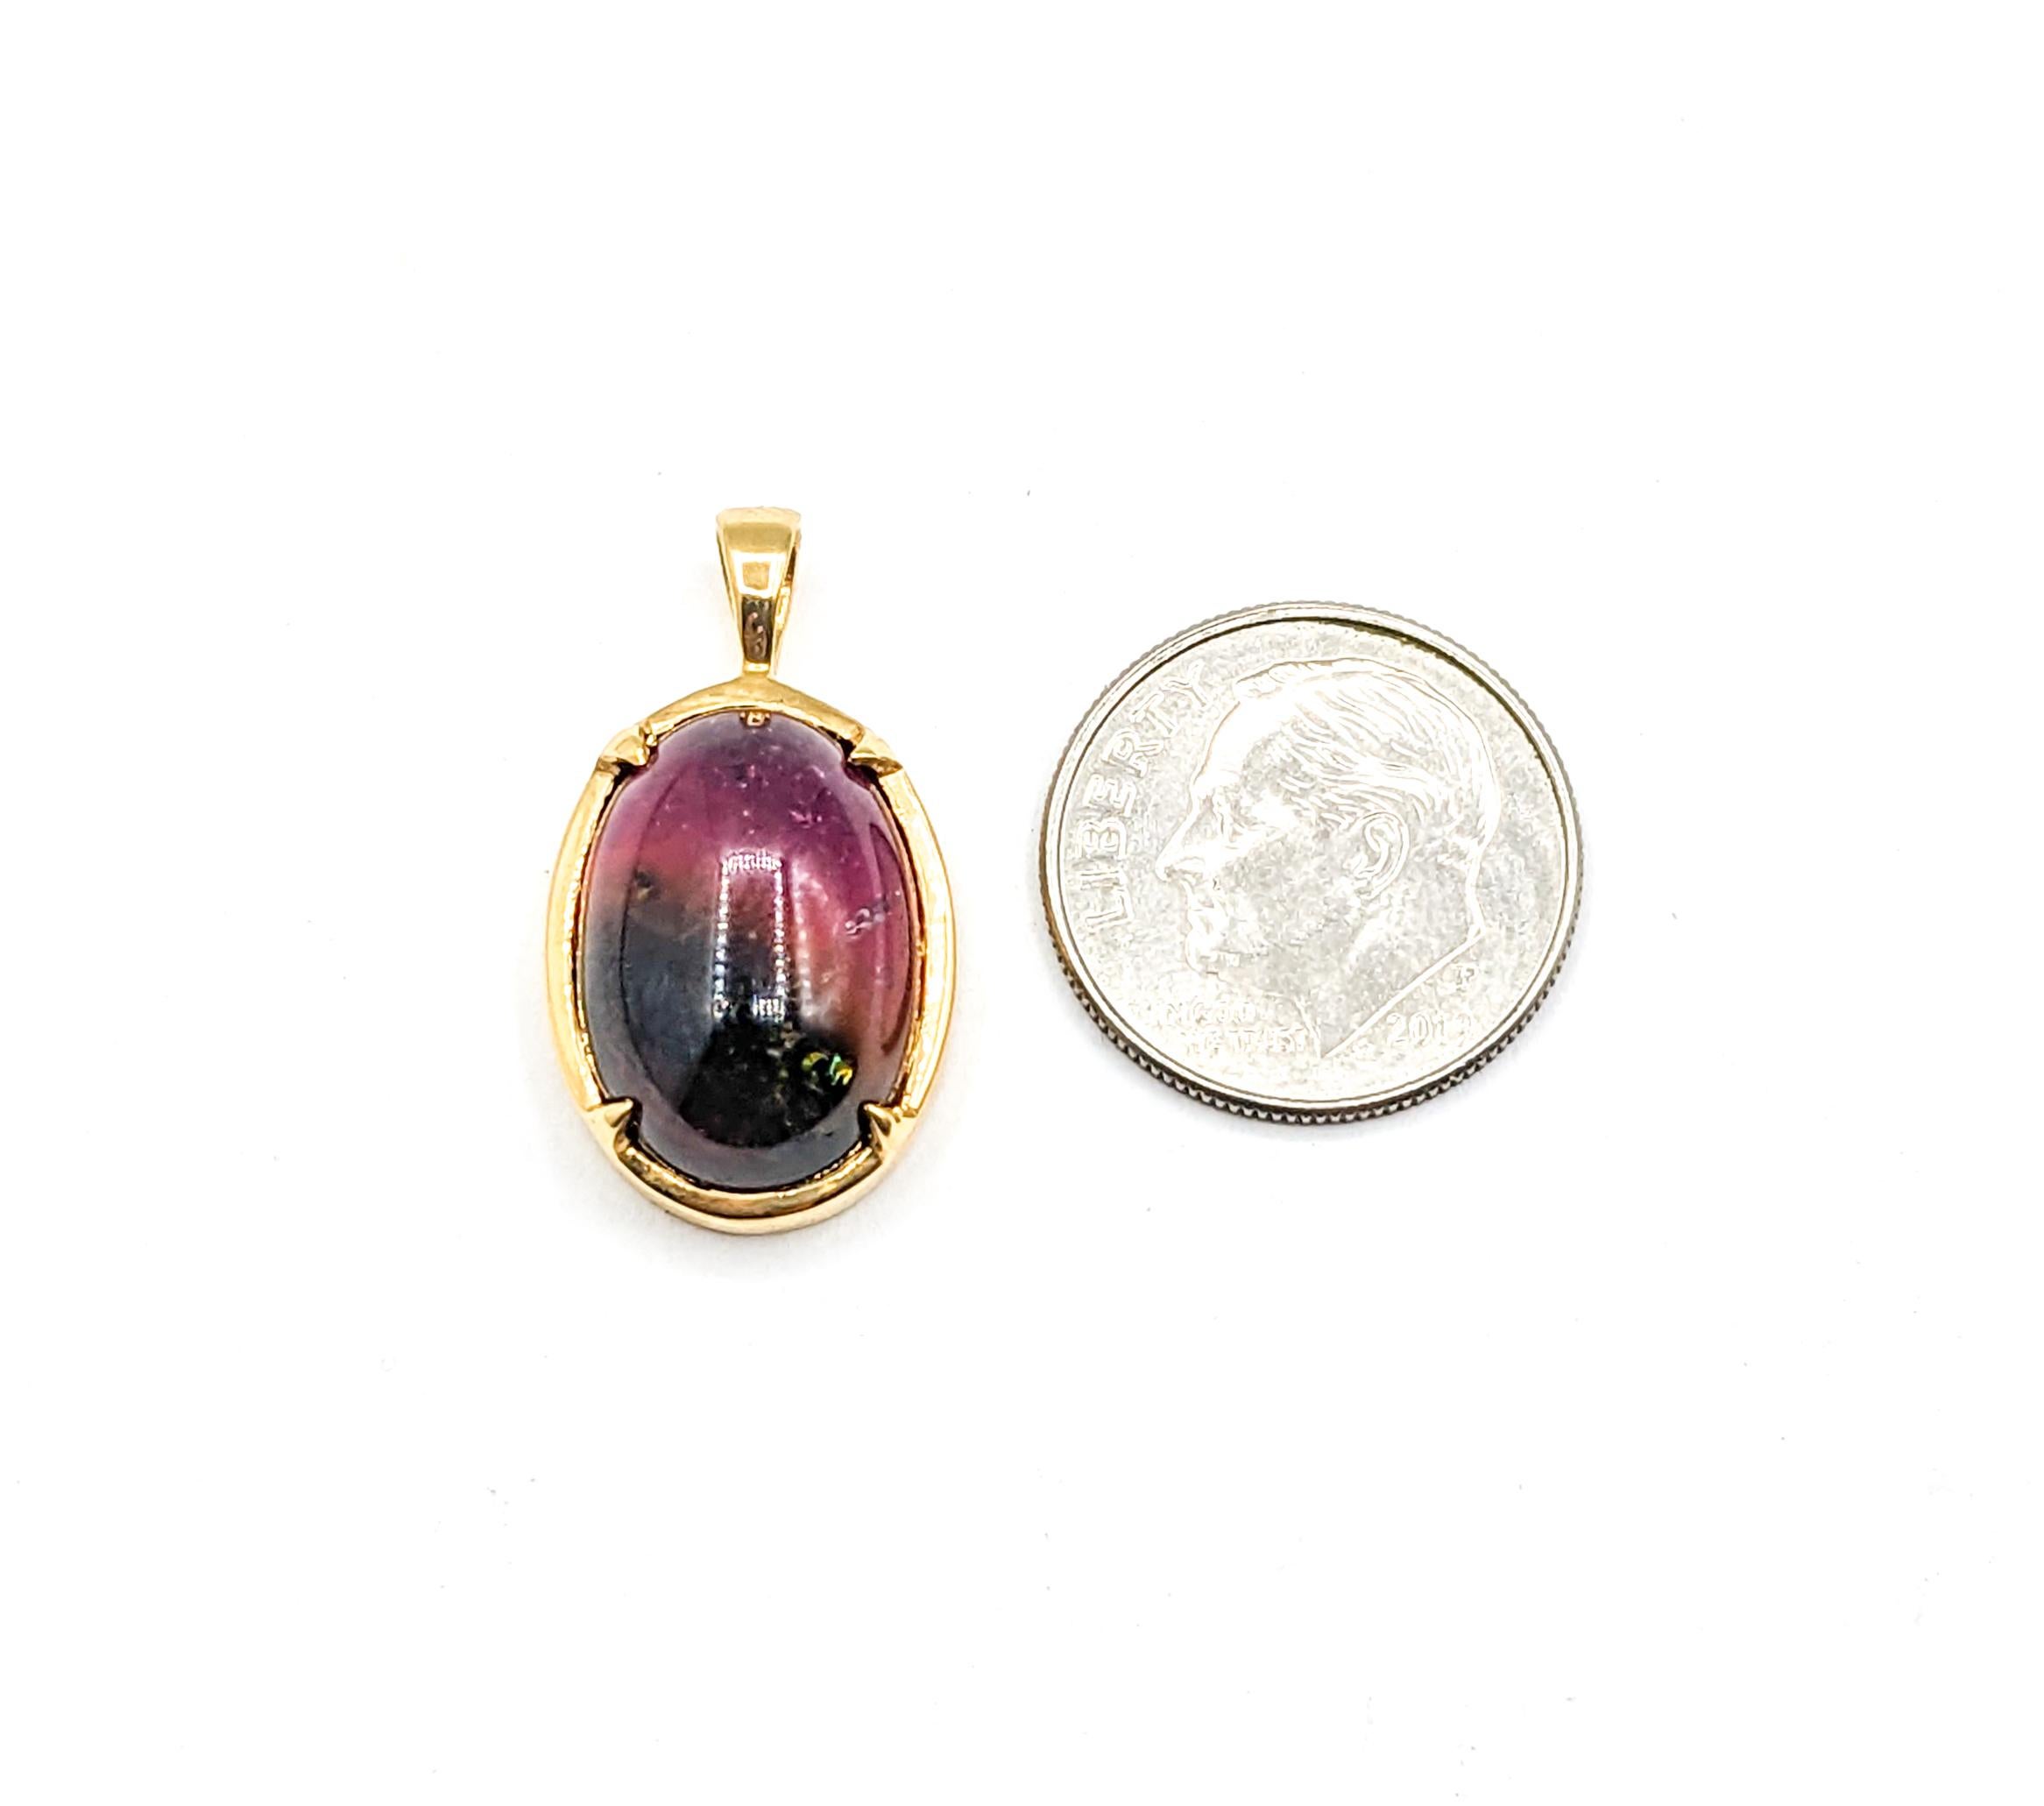 Classic 18k Oval Cabochon Watermelon Tourmaline Charm Pendant In Excellent Condition For Sale In Bloomington, MN